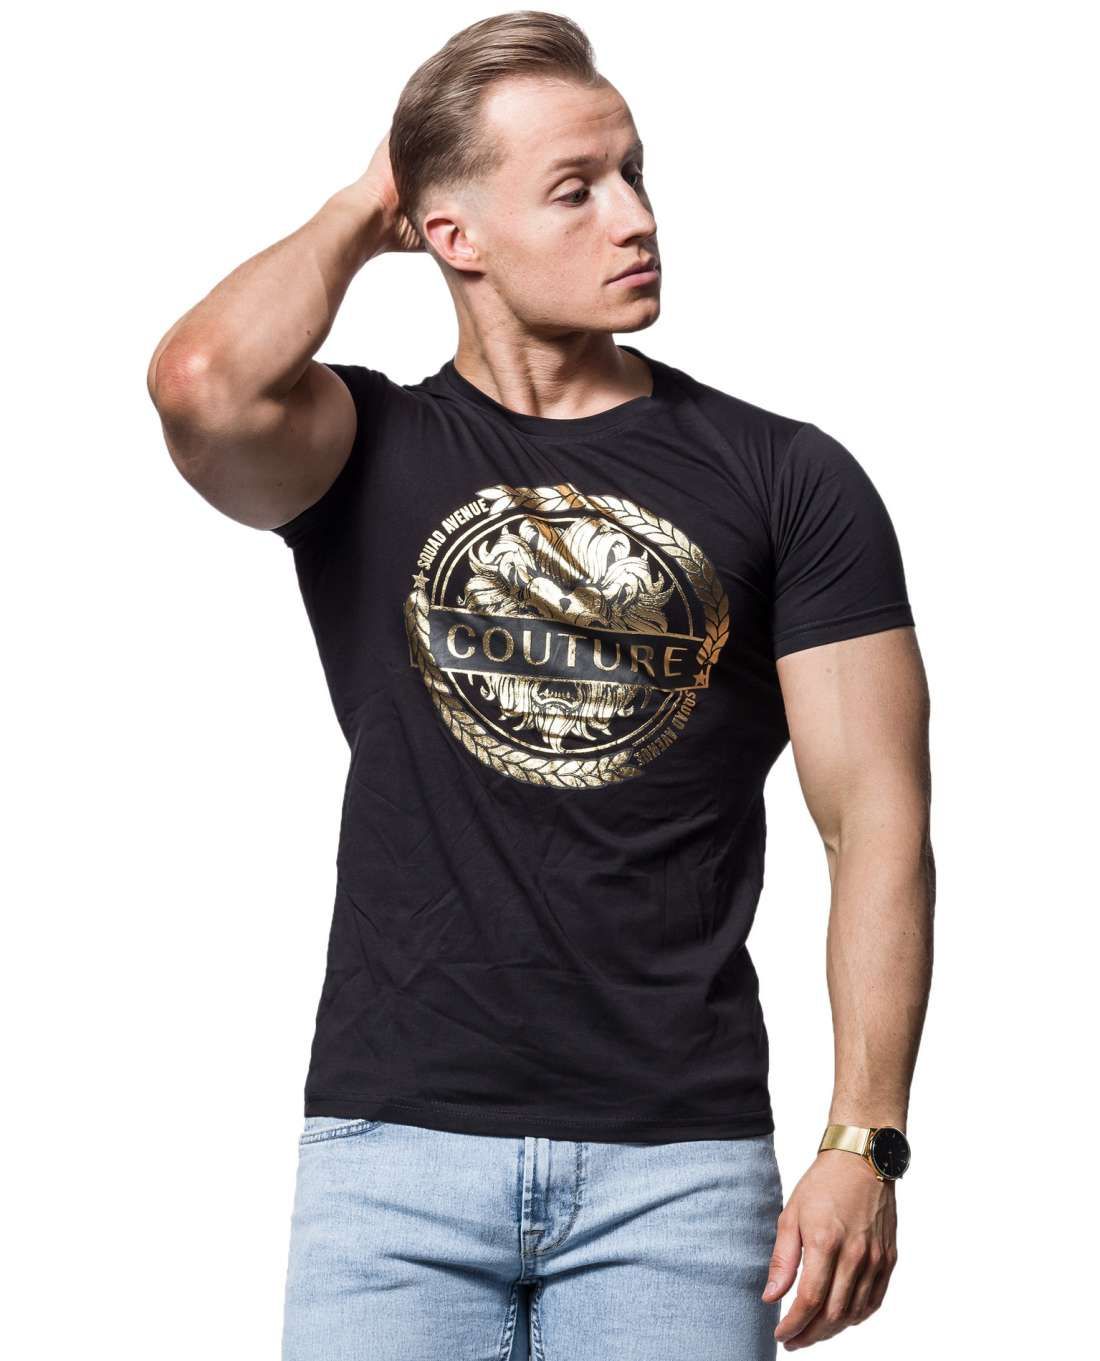 Tim Couture T-Shirt Black Gold Jerone